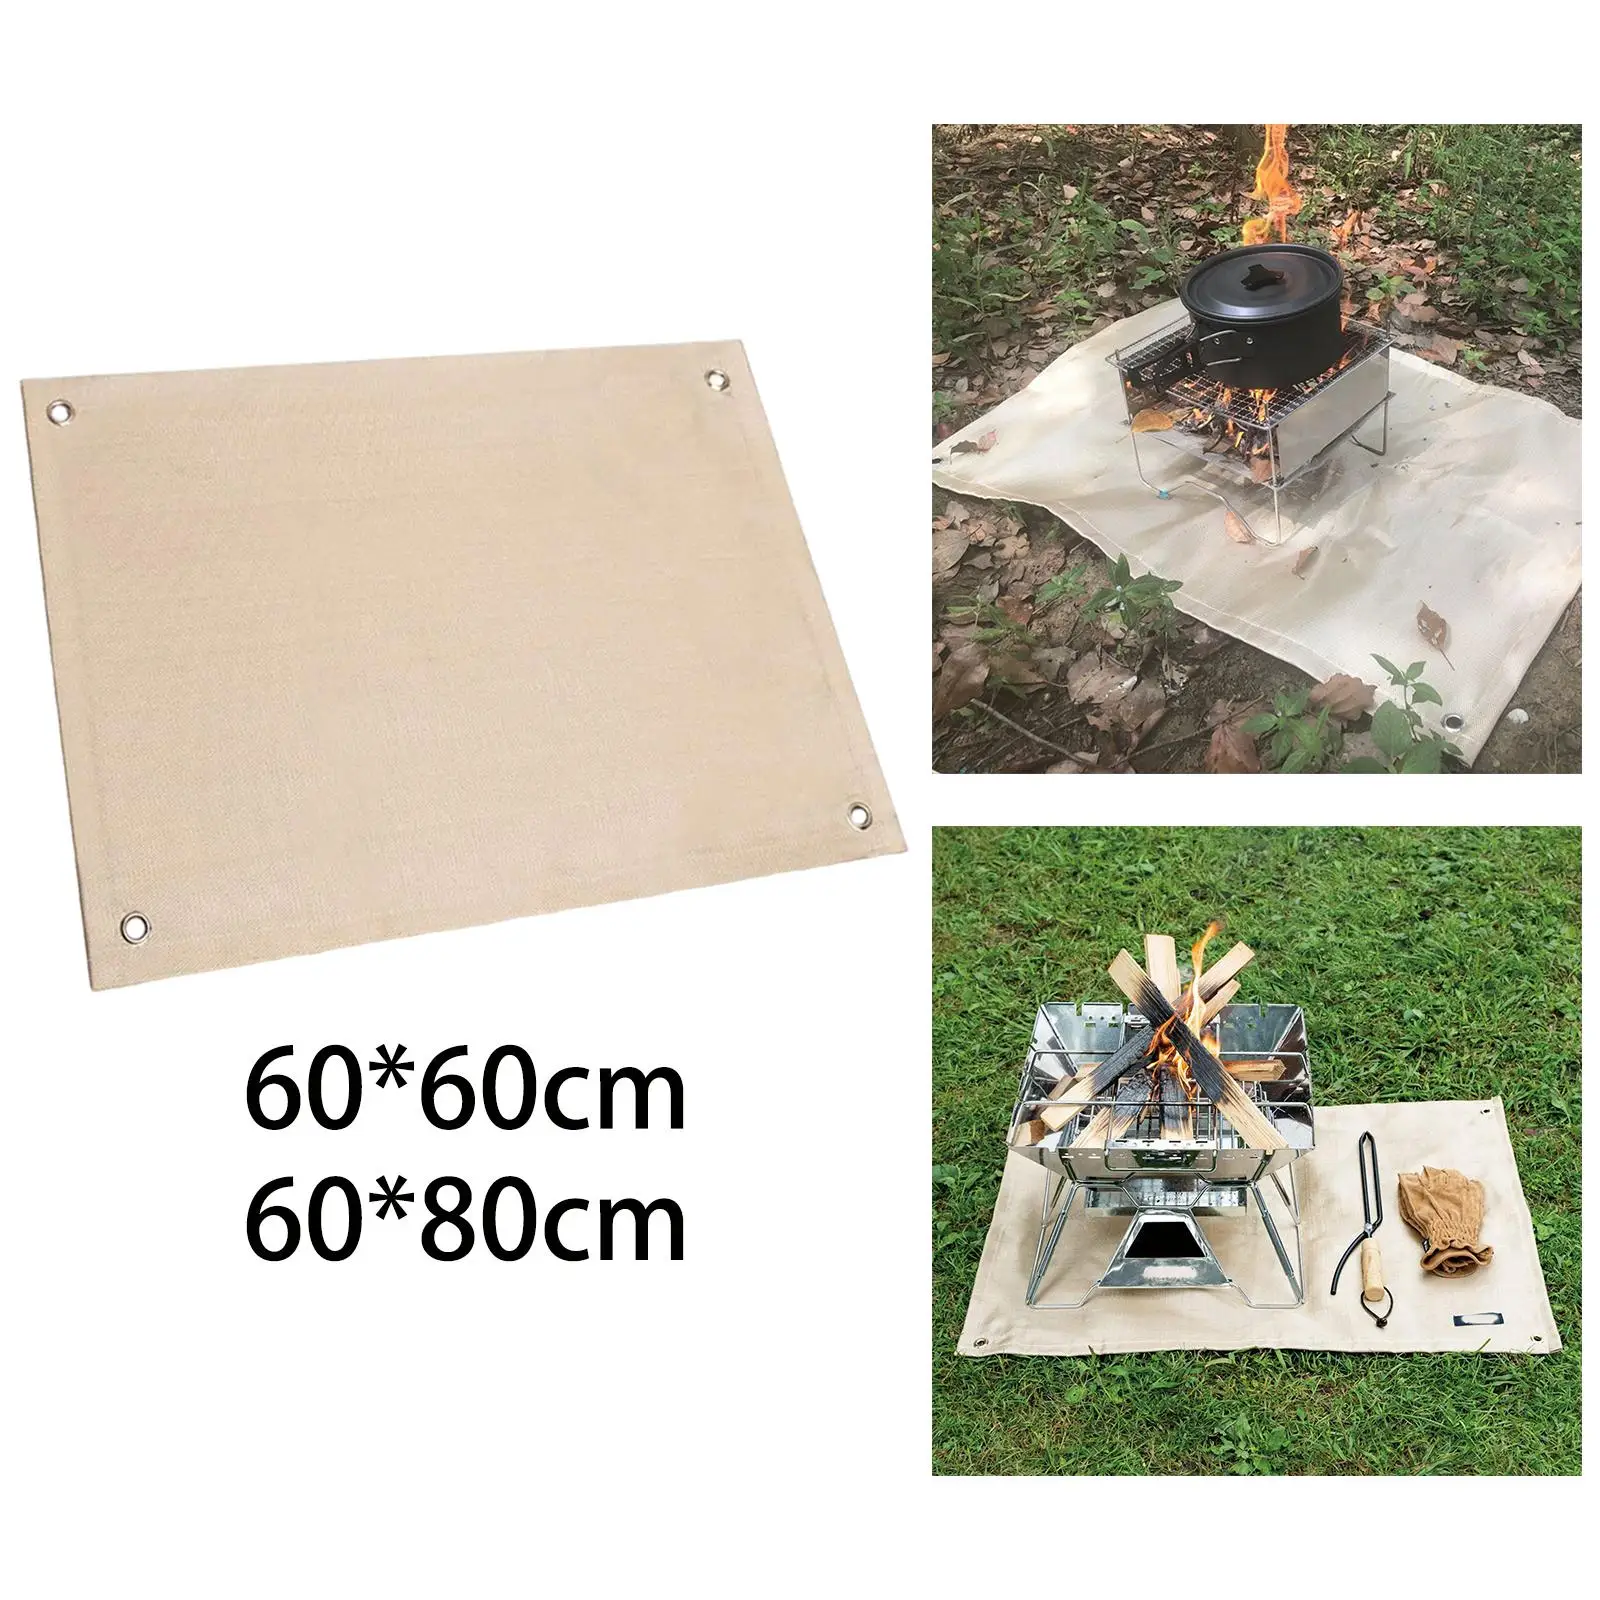 Glass Fiber Camping Fire Blanket High Temperature Resistant Protective Shockproof Fireproof Mat for Stove Picnics Lawn BBQ Deck